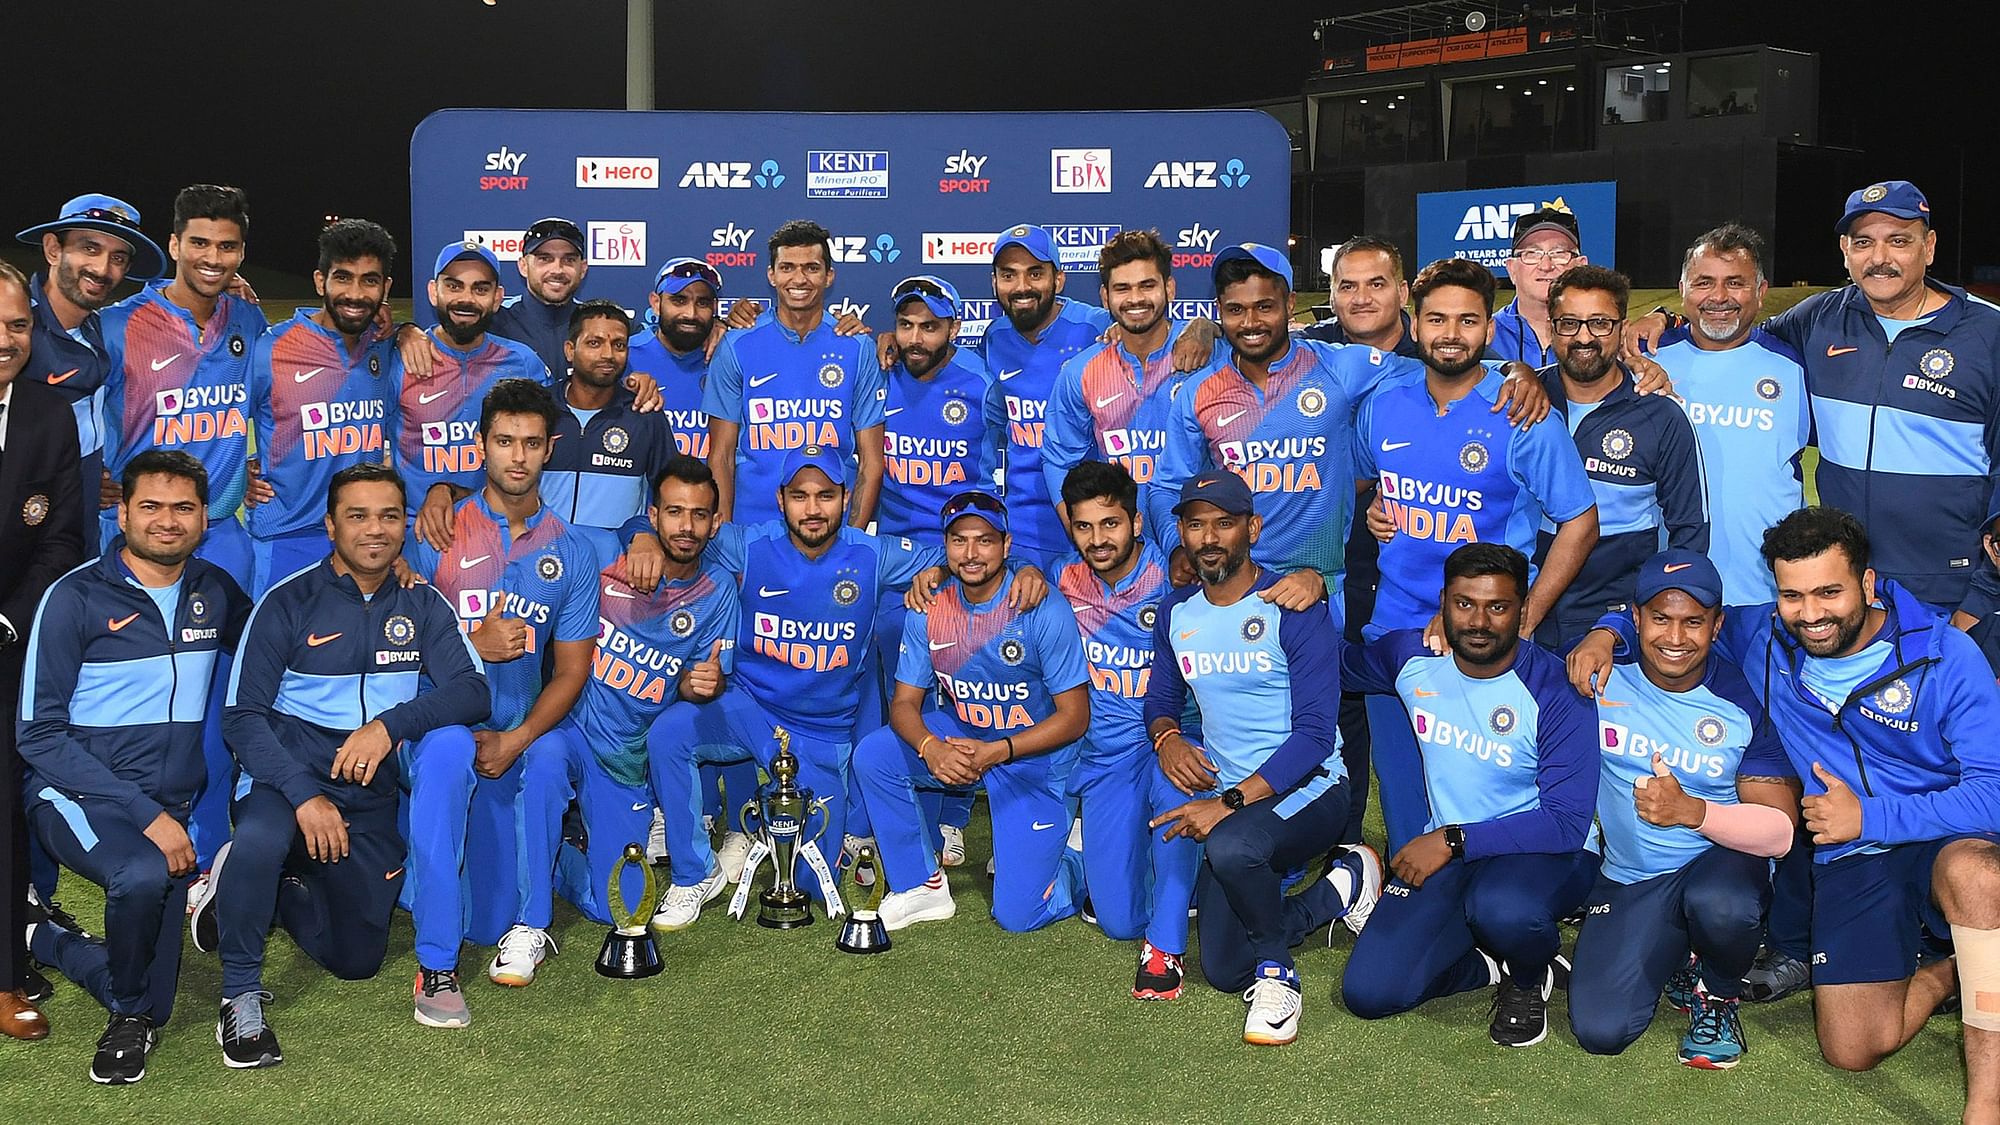 The Indian cricket team stand for a picture after completing a 5-0 T20 series sweep of New Zealand.